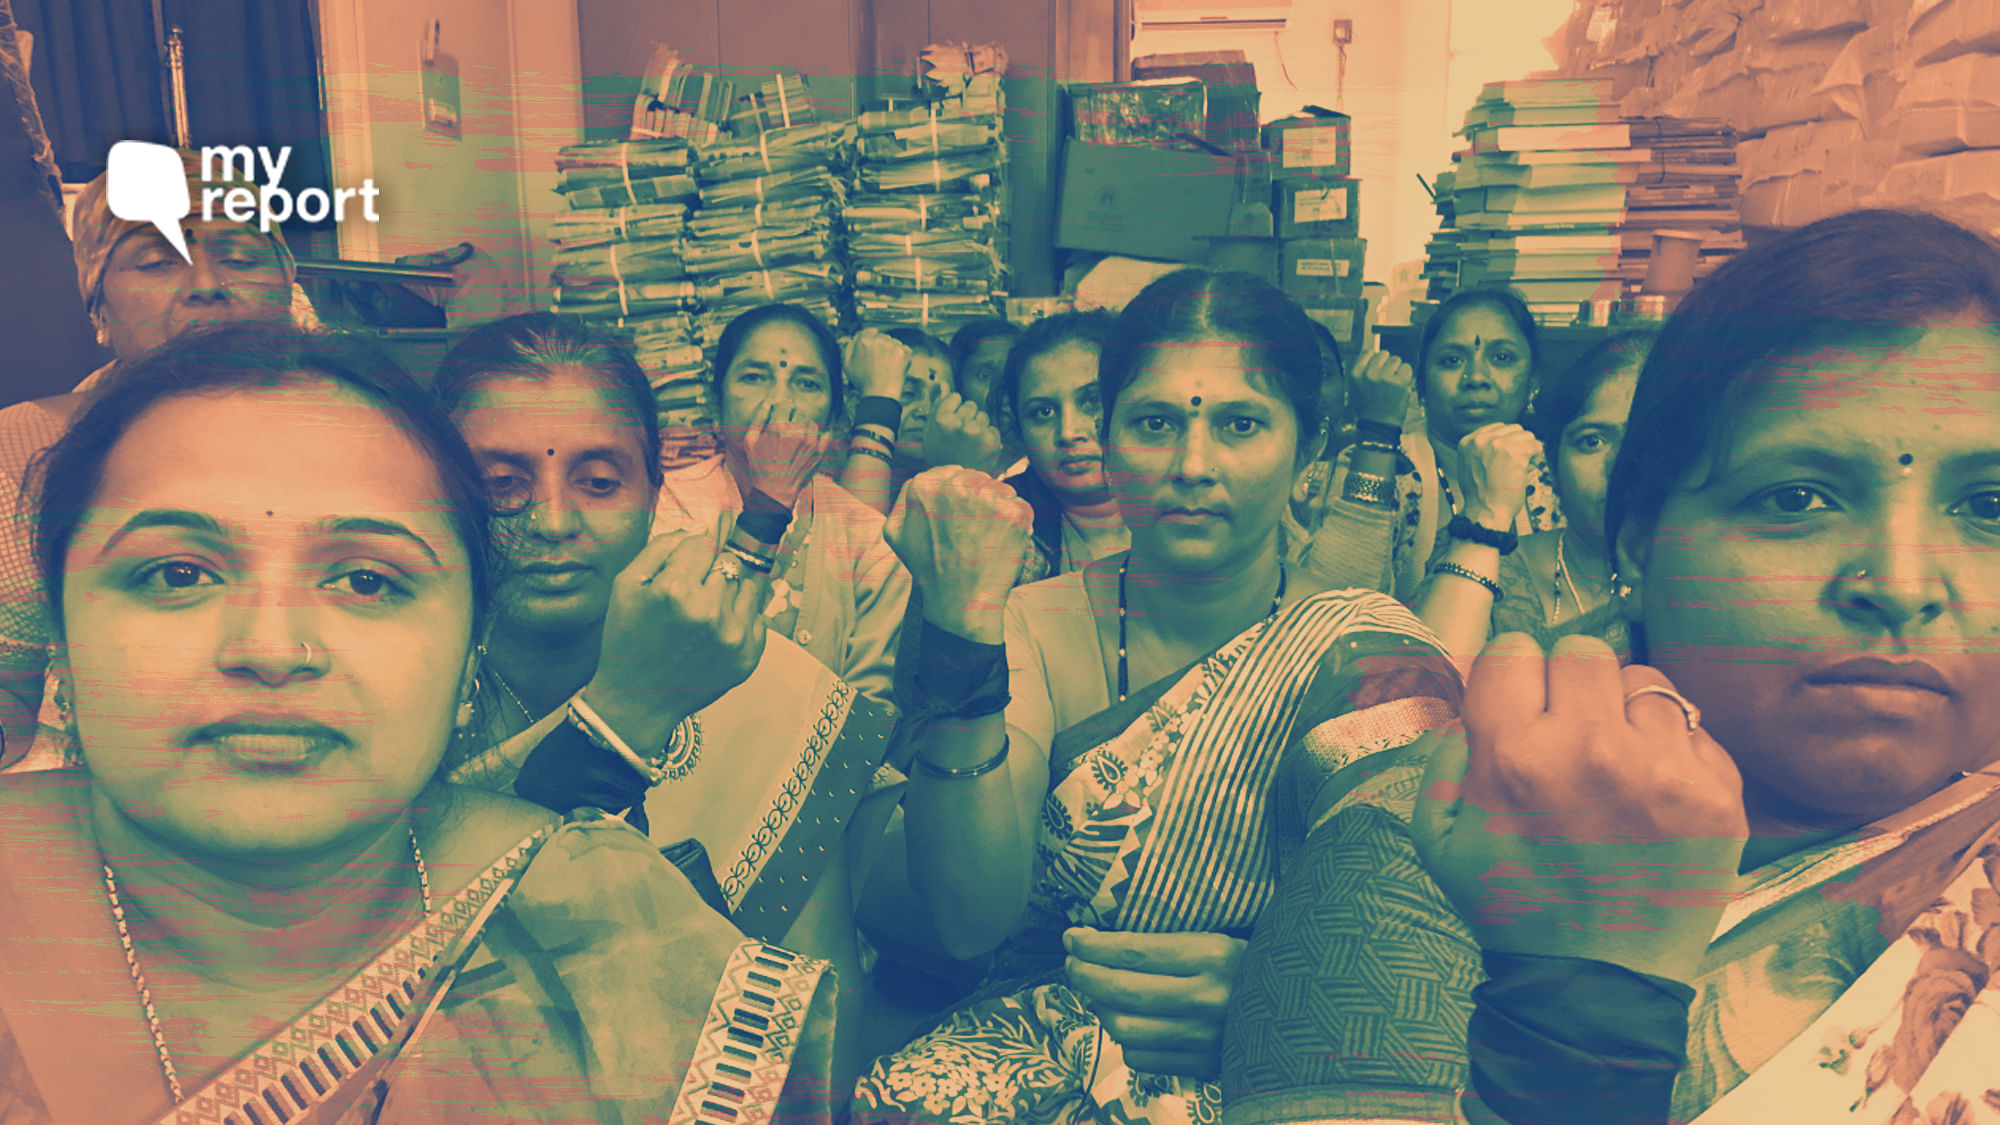 Public library workers in Bengaluru are up in arms over not getting minimum wages. They are now demanding regularisation of employment and social security benefits.